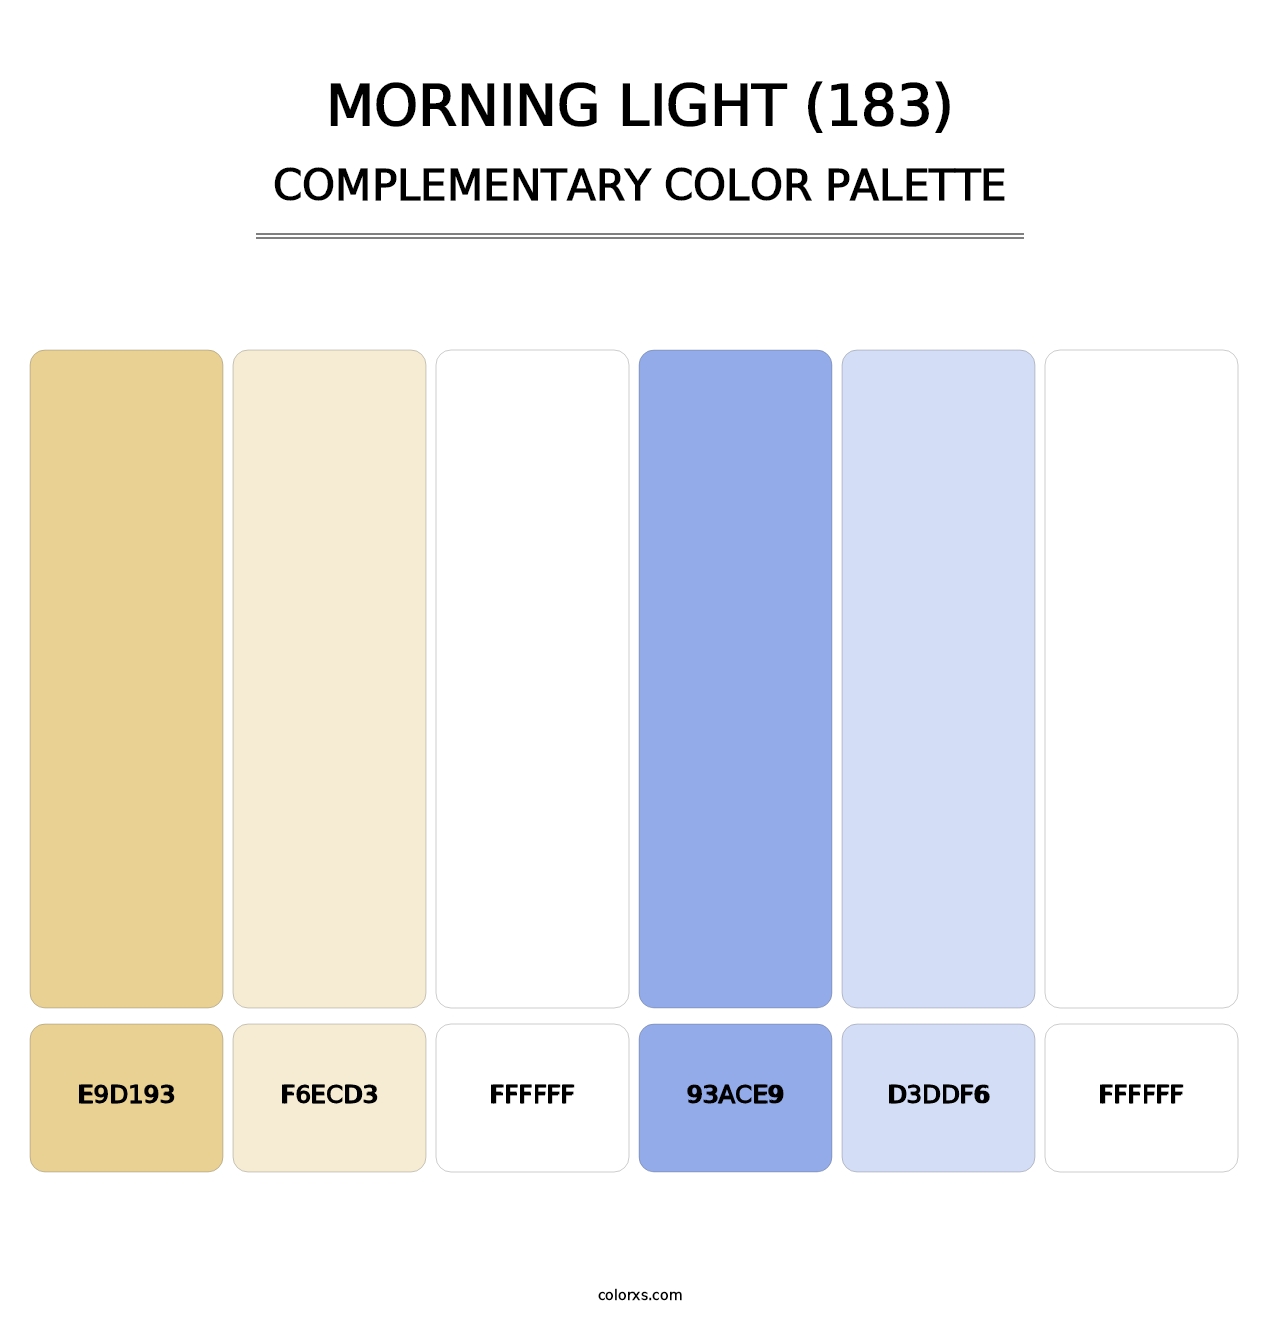 Morning Light (183) - Complementary Color Palette